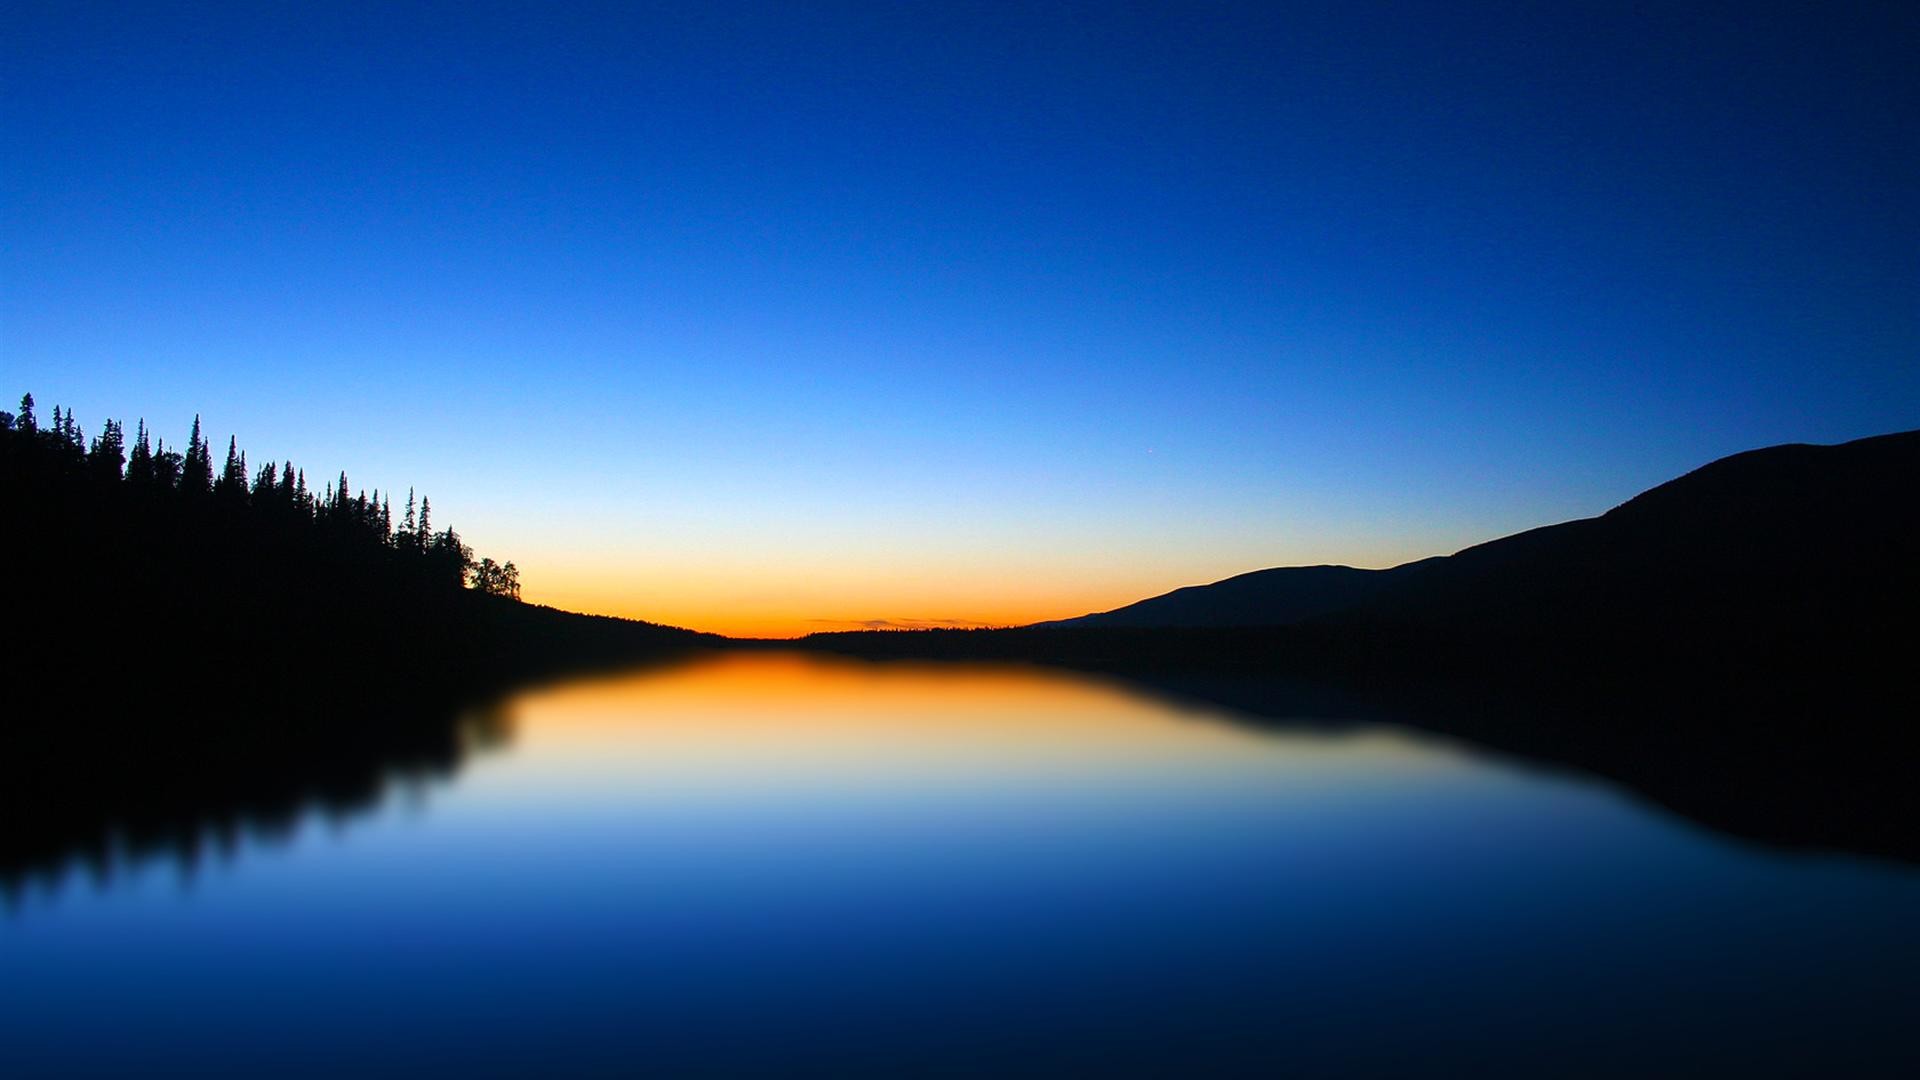 1920x1080  Hd Blue lake scenic wallpaper for windows wide wallpapers :1280x800,1440x900,1680x1050